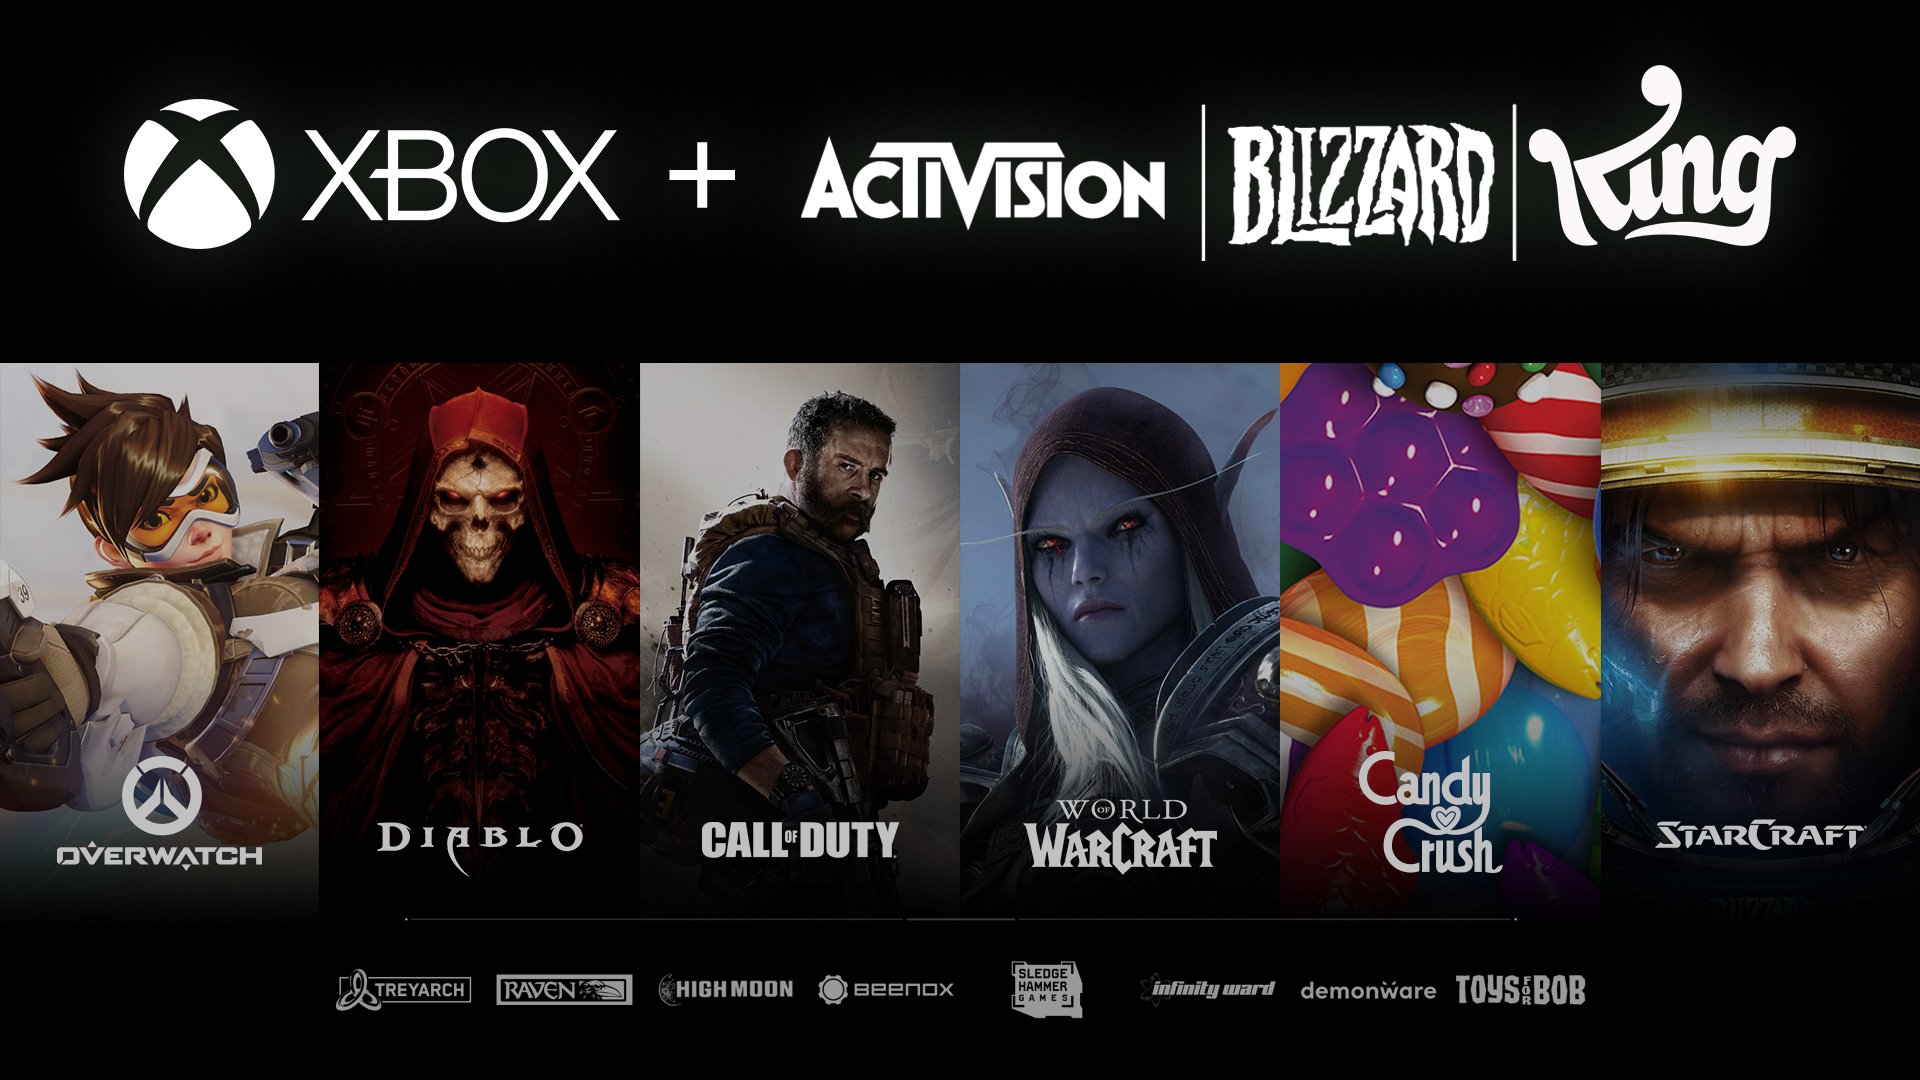 Tom Warren on X: if the Activision Blizzard deal goes through, I really  hope Microsoft leans into the Battle net PC launcher rather than the Xbox  app. I've never had an issue